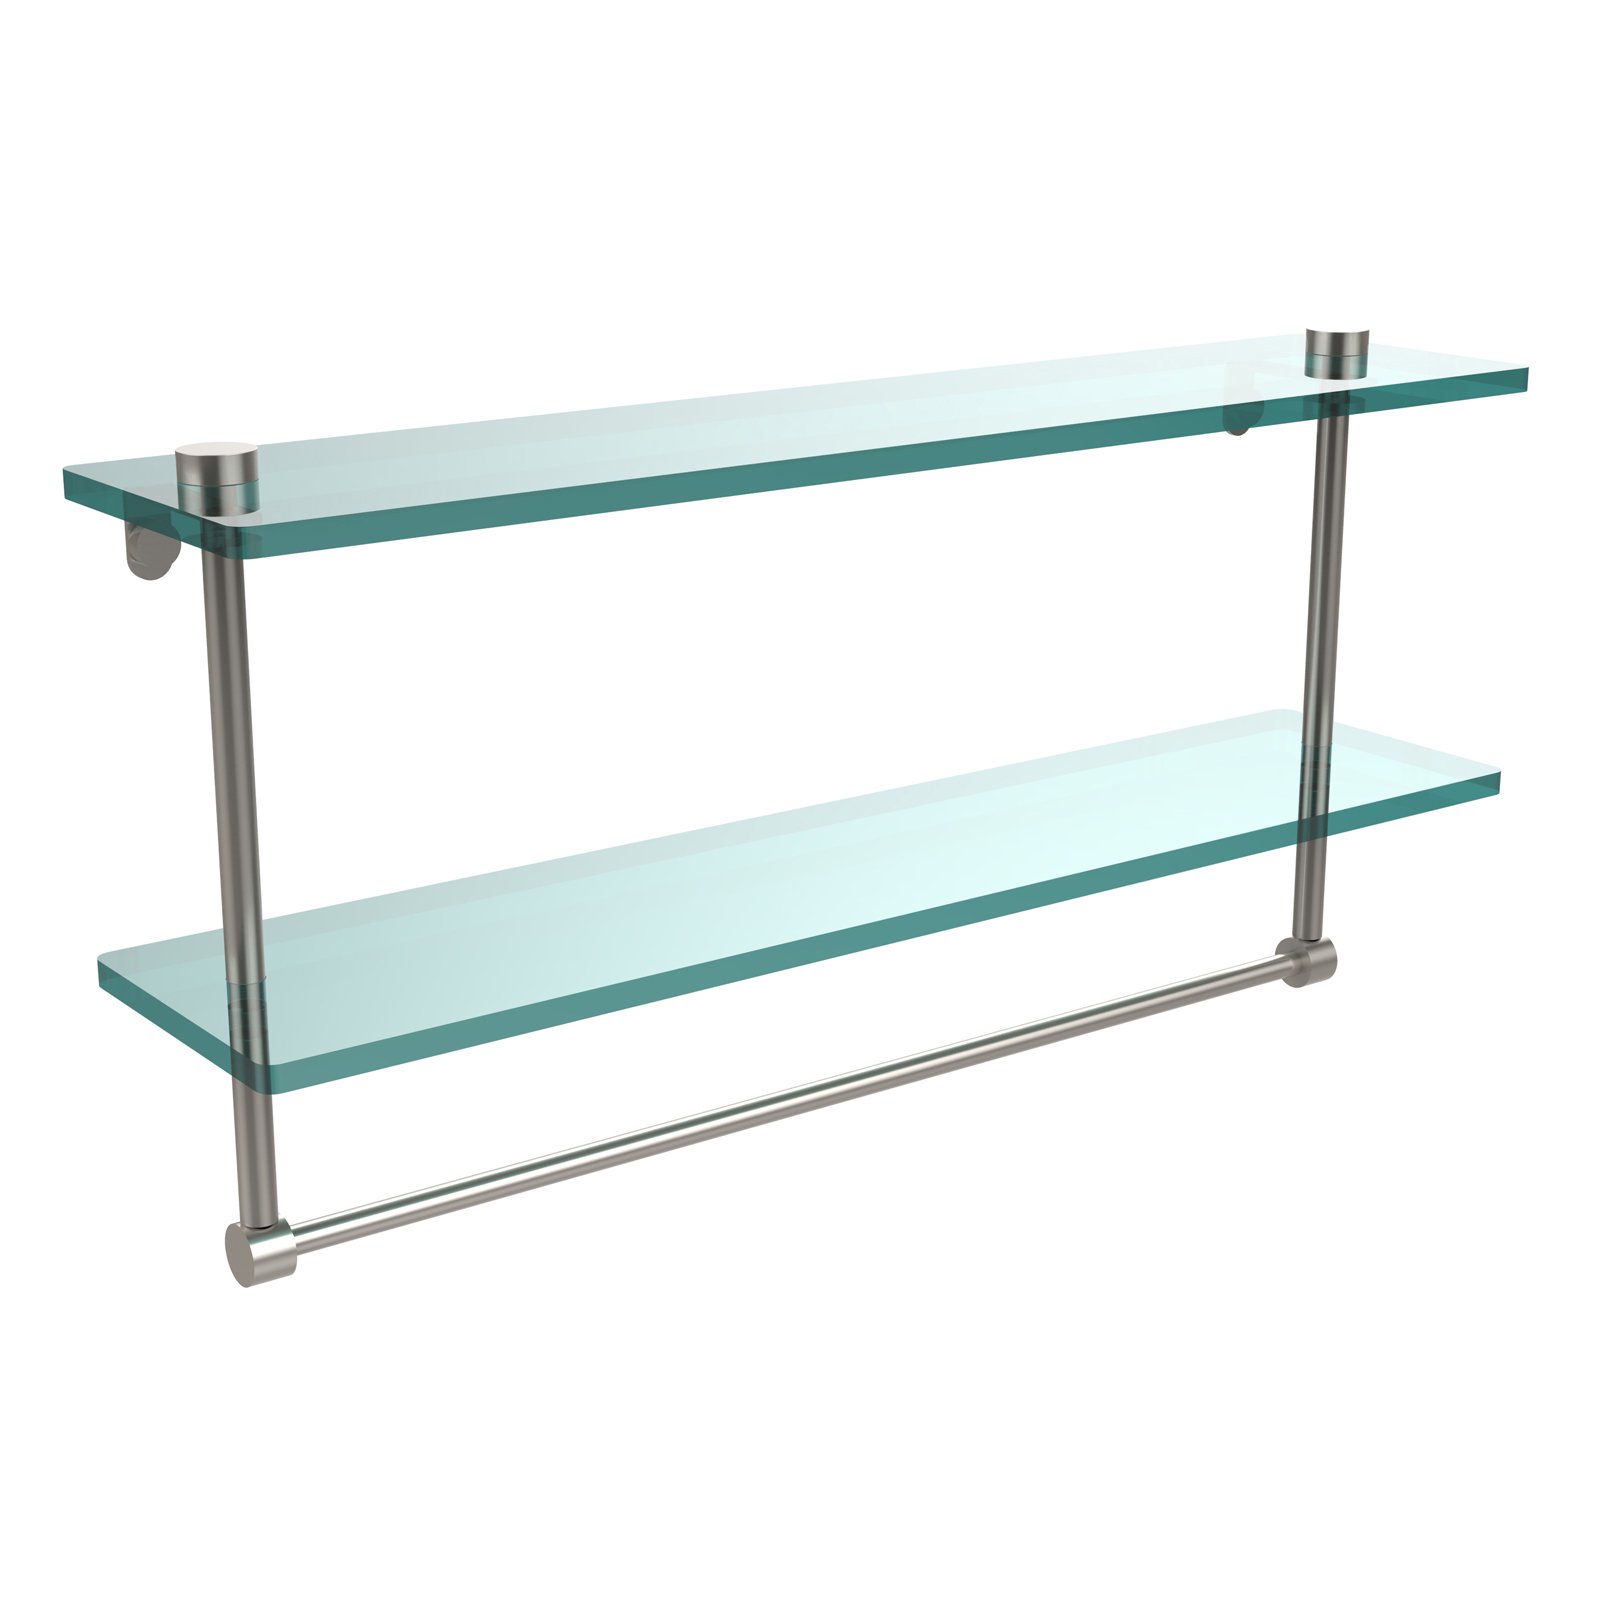 Two Tiered Glass Shelf with Integrated Towel Bar - Satin Brass / 22 Inch - image 2 of 2